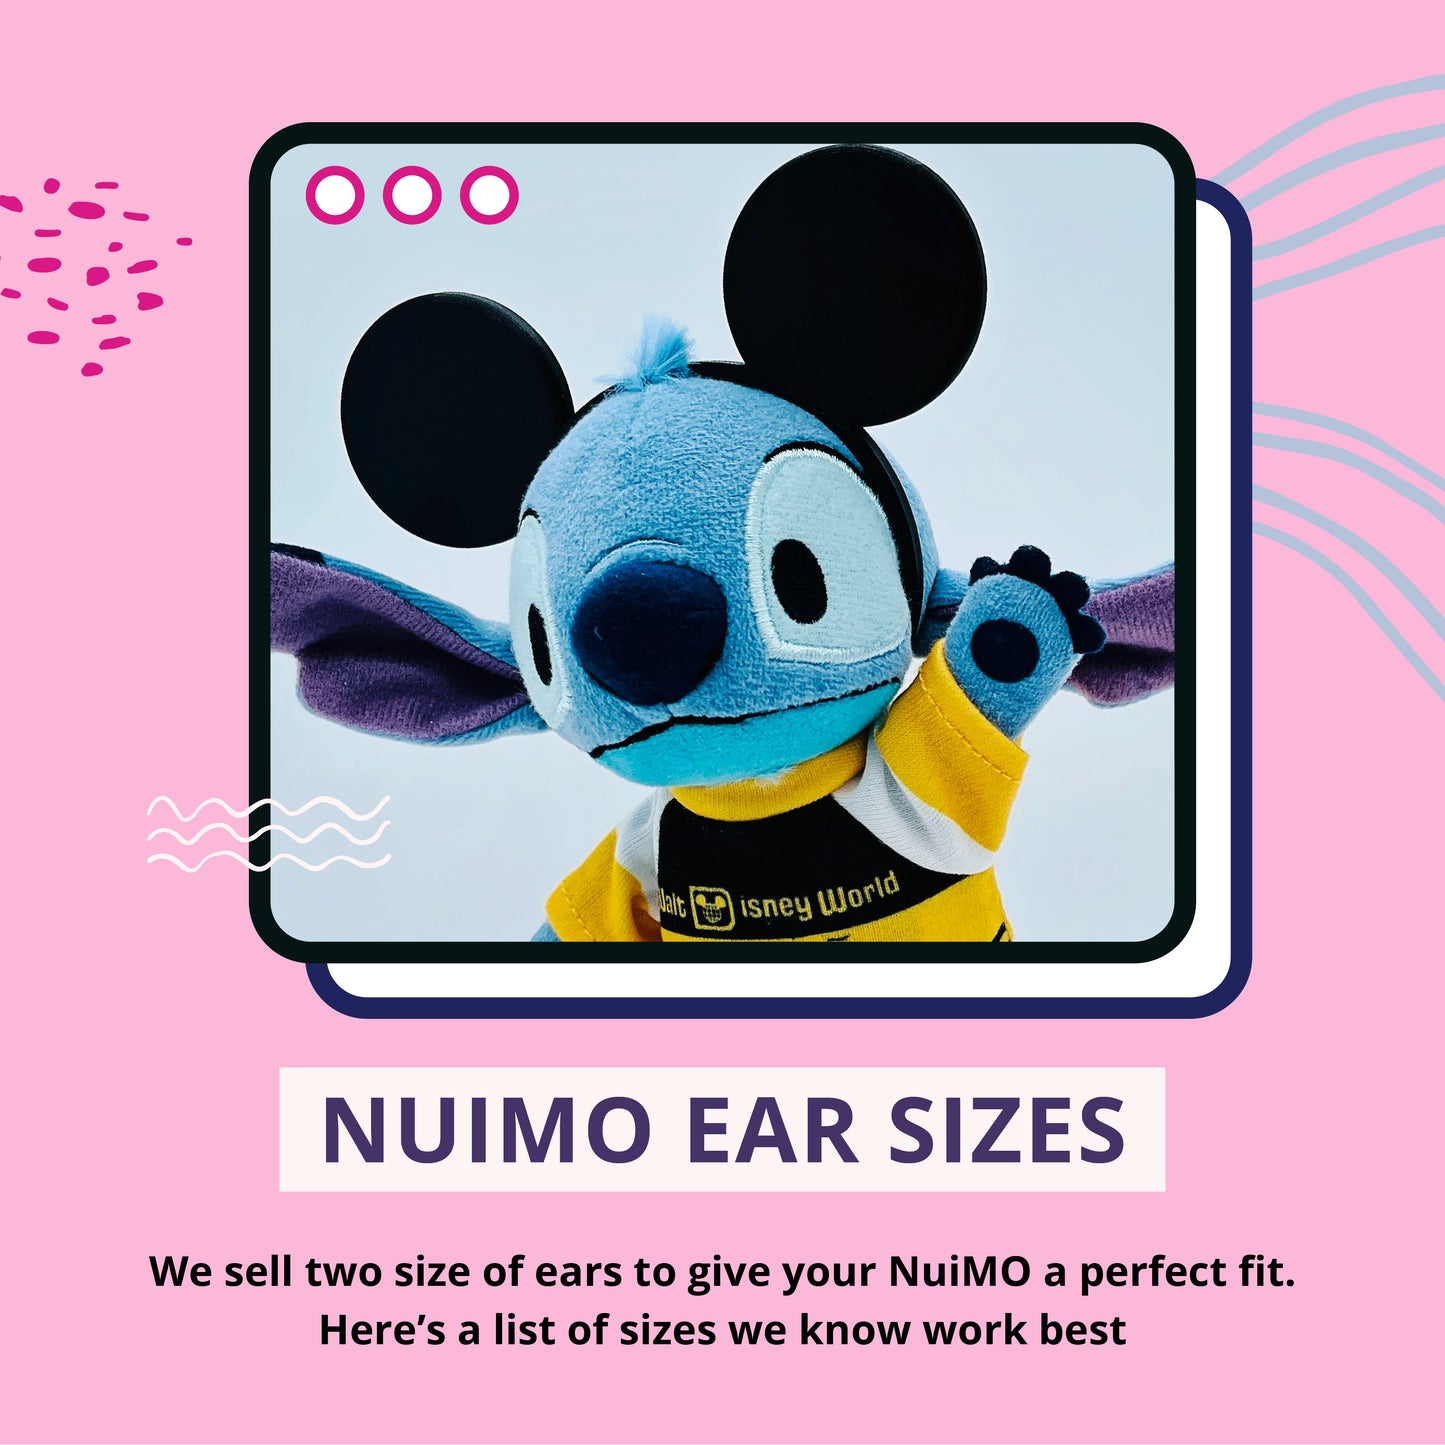 Star Wars Themed Ears for NuiMO Plushes